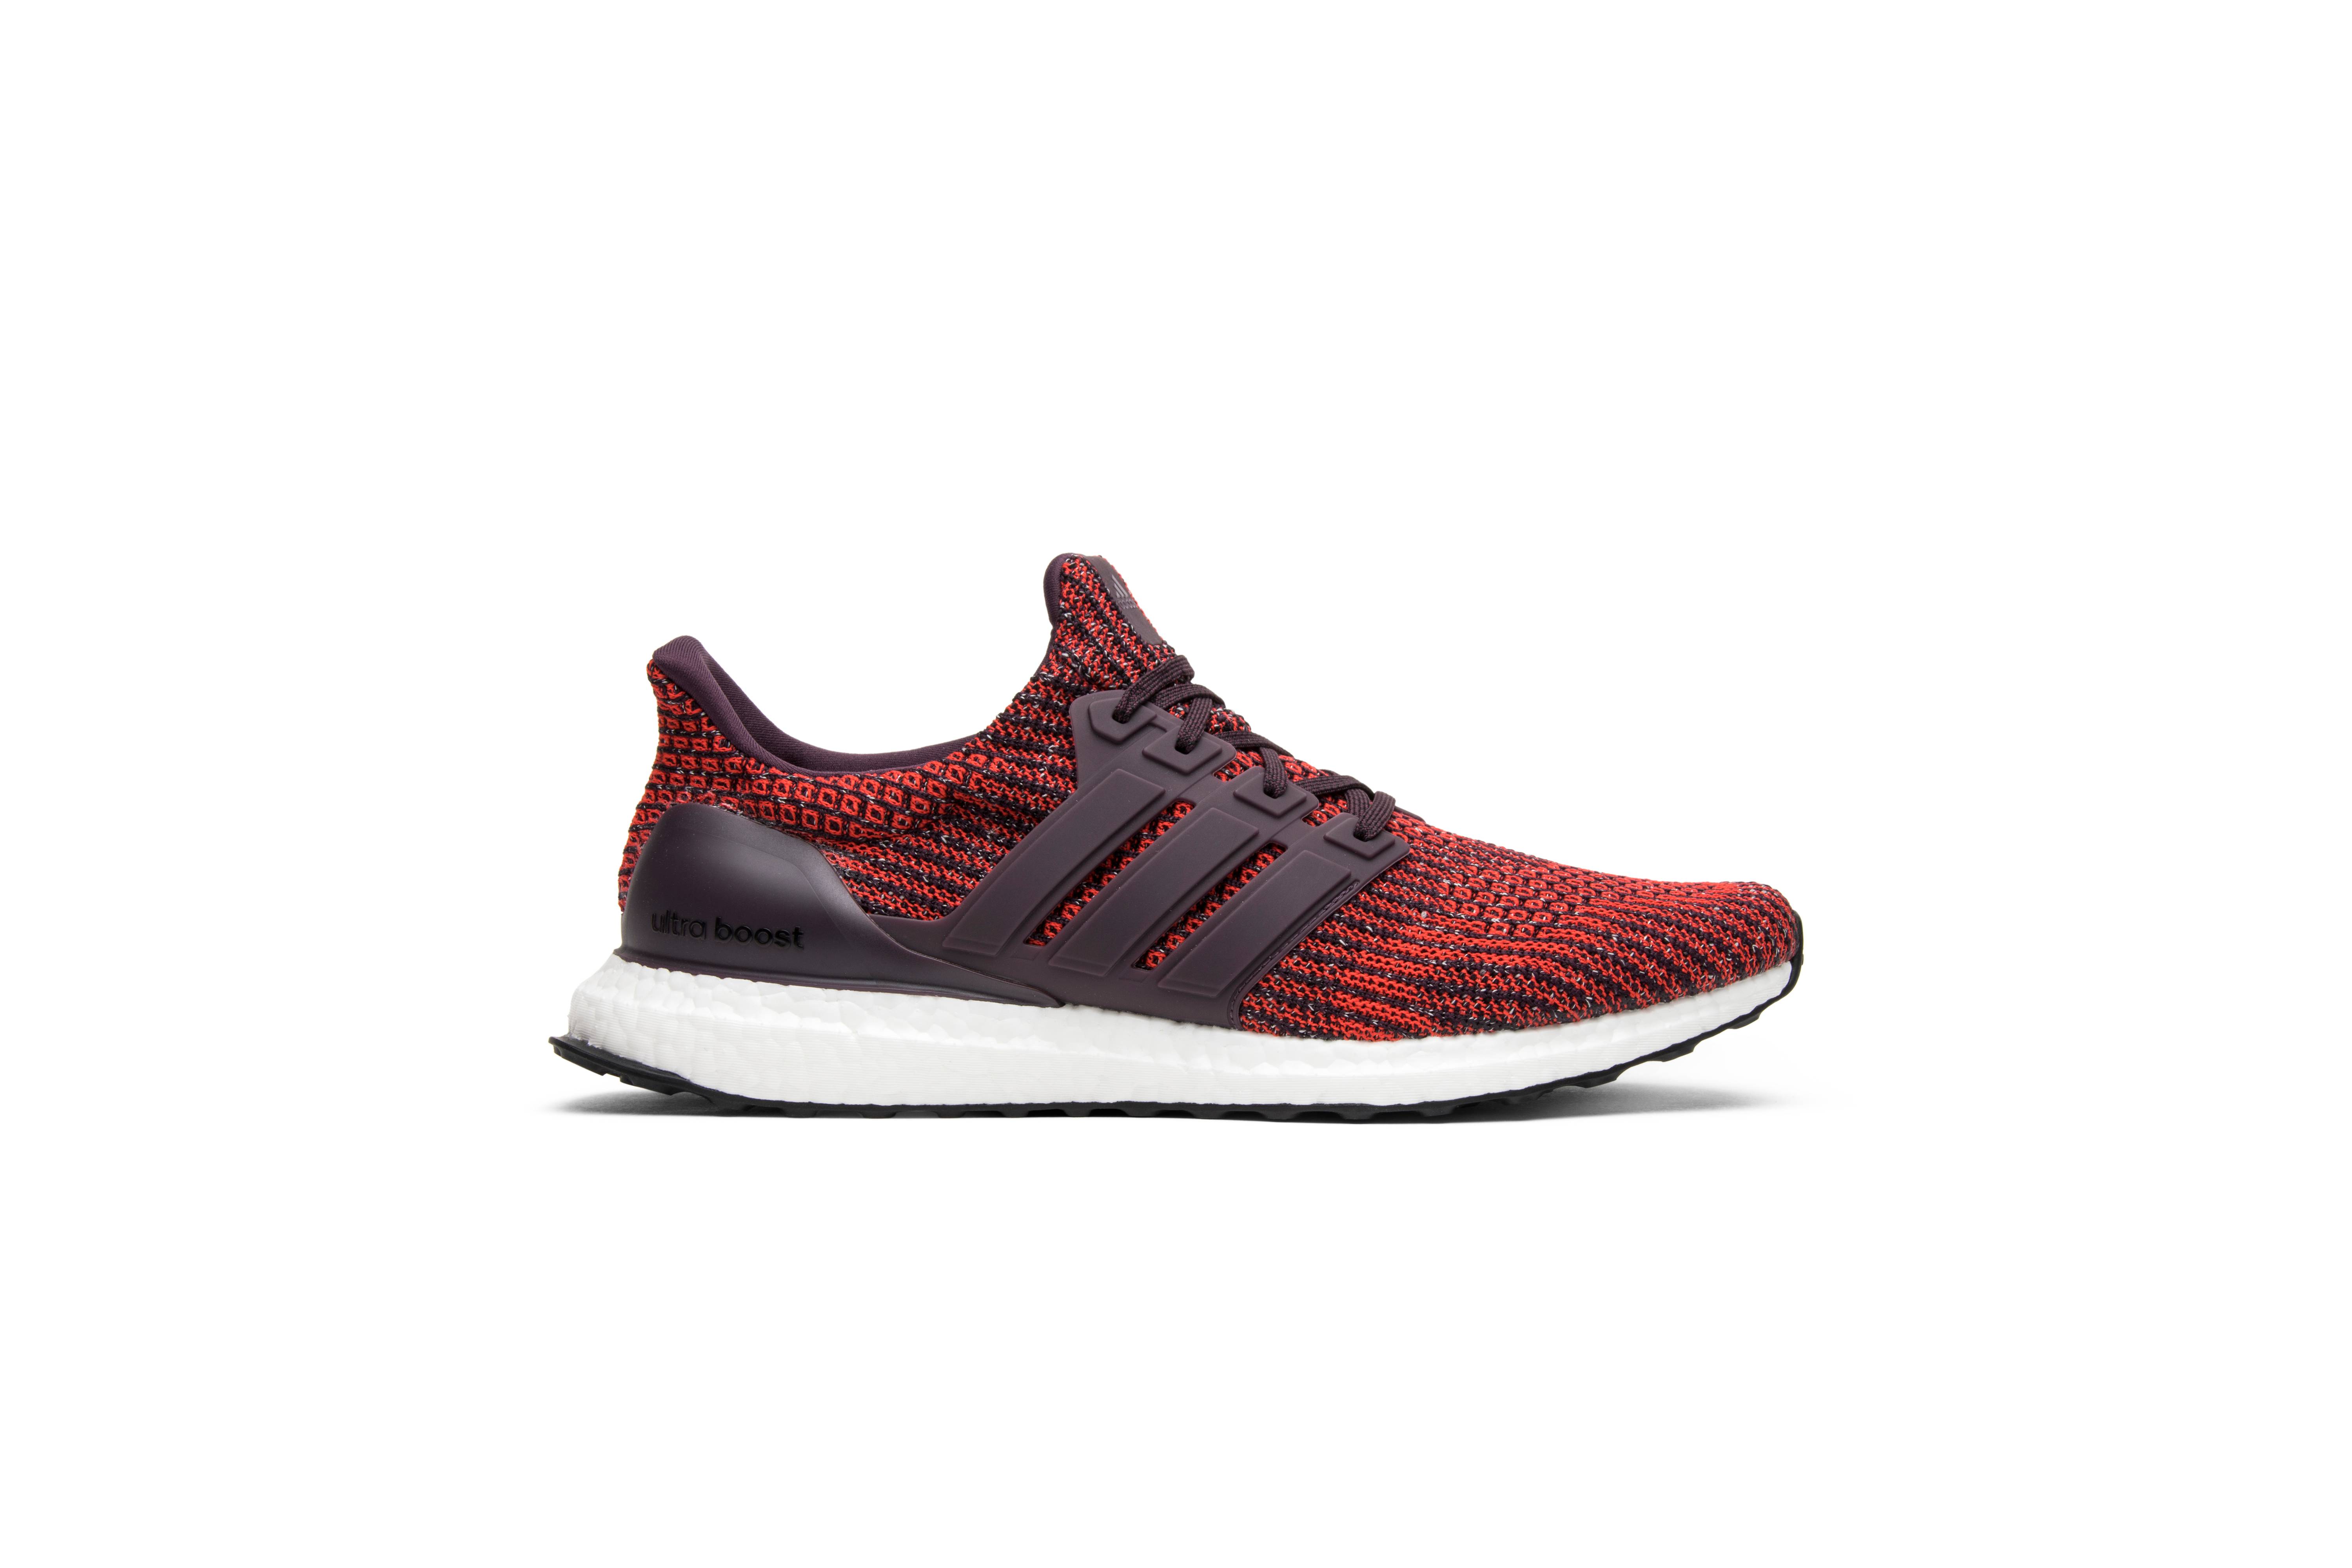 adidas noble red